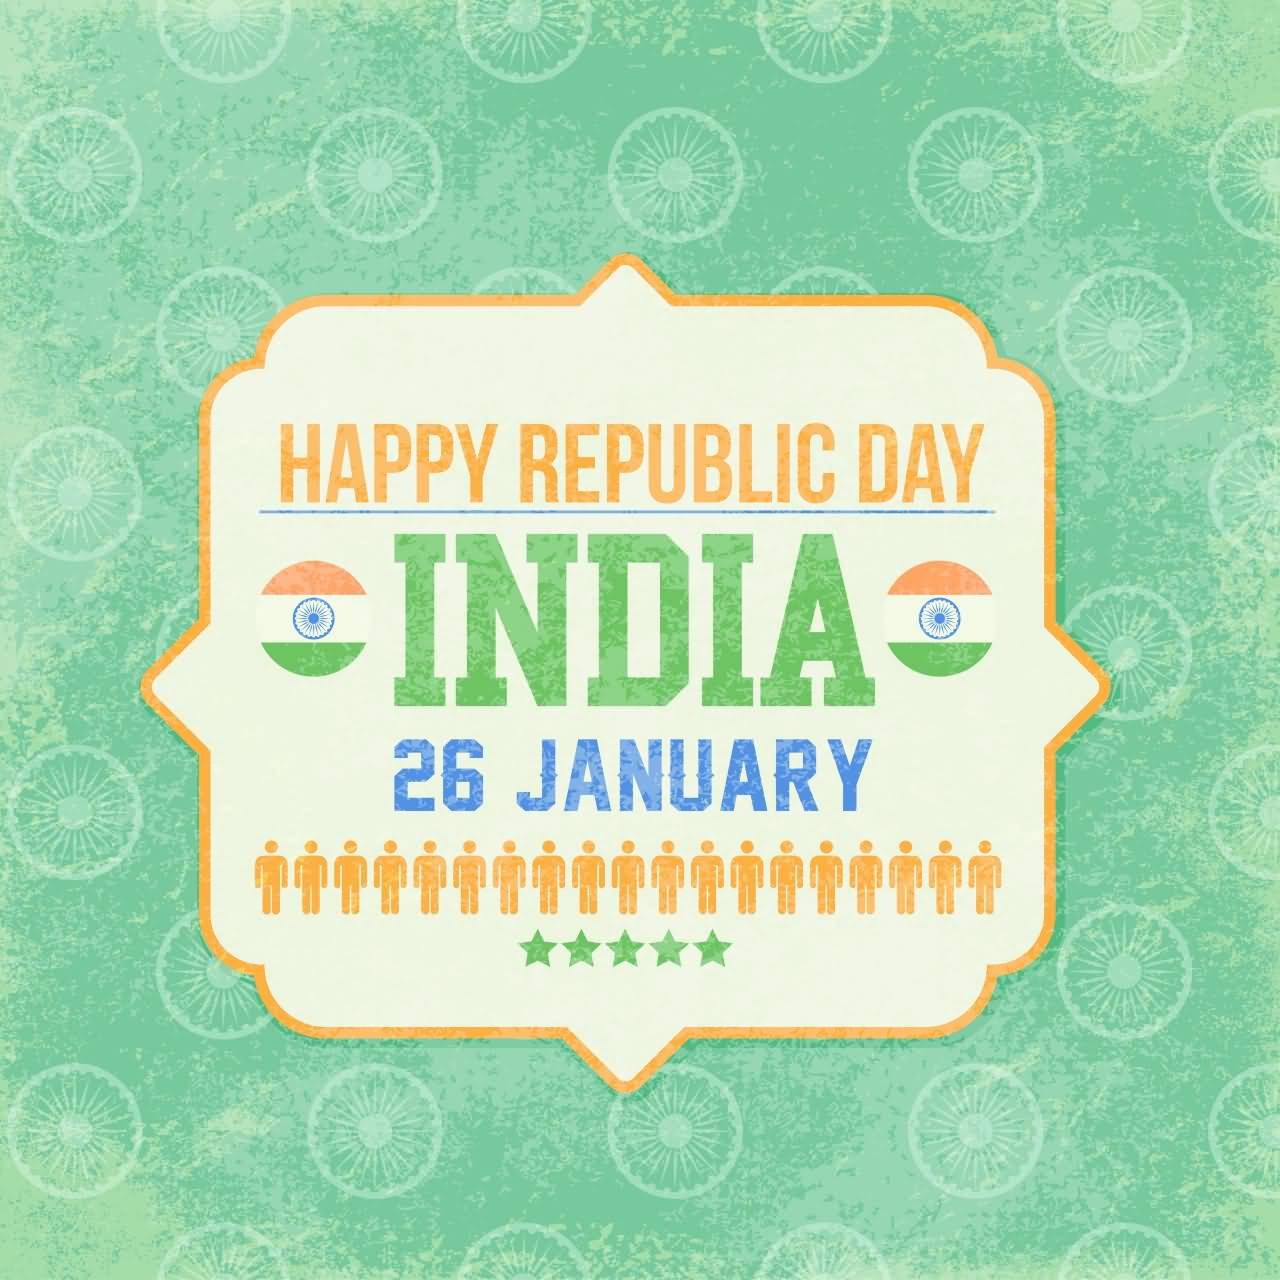 Finger Paint Birthday Card Ideas 60 Beautiful Republic Day India Greeting Card Pictures